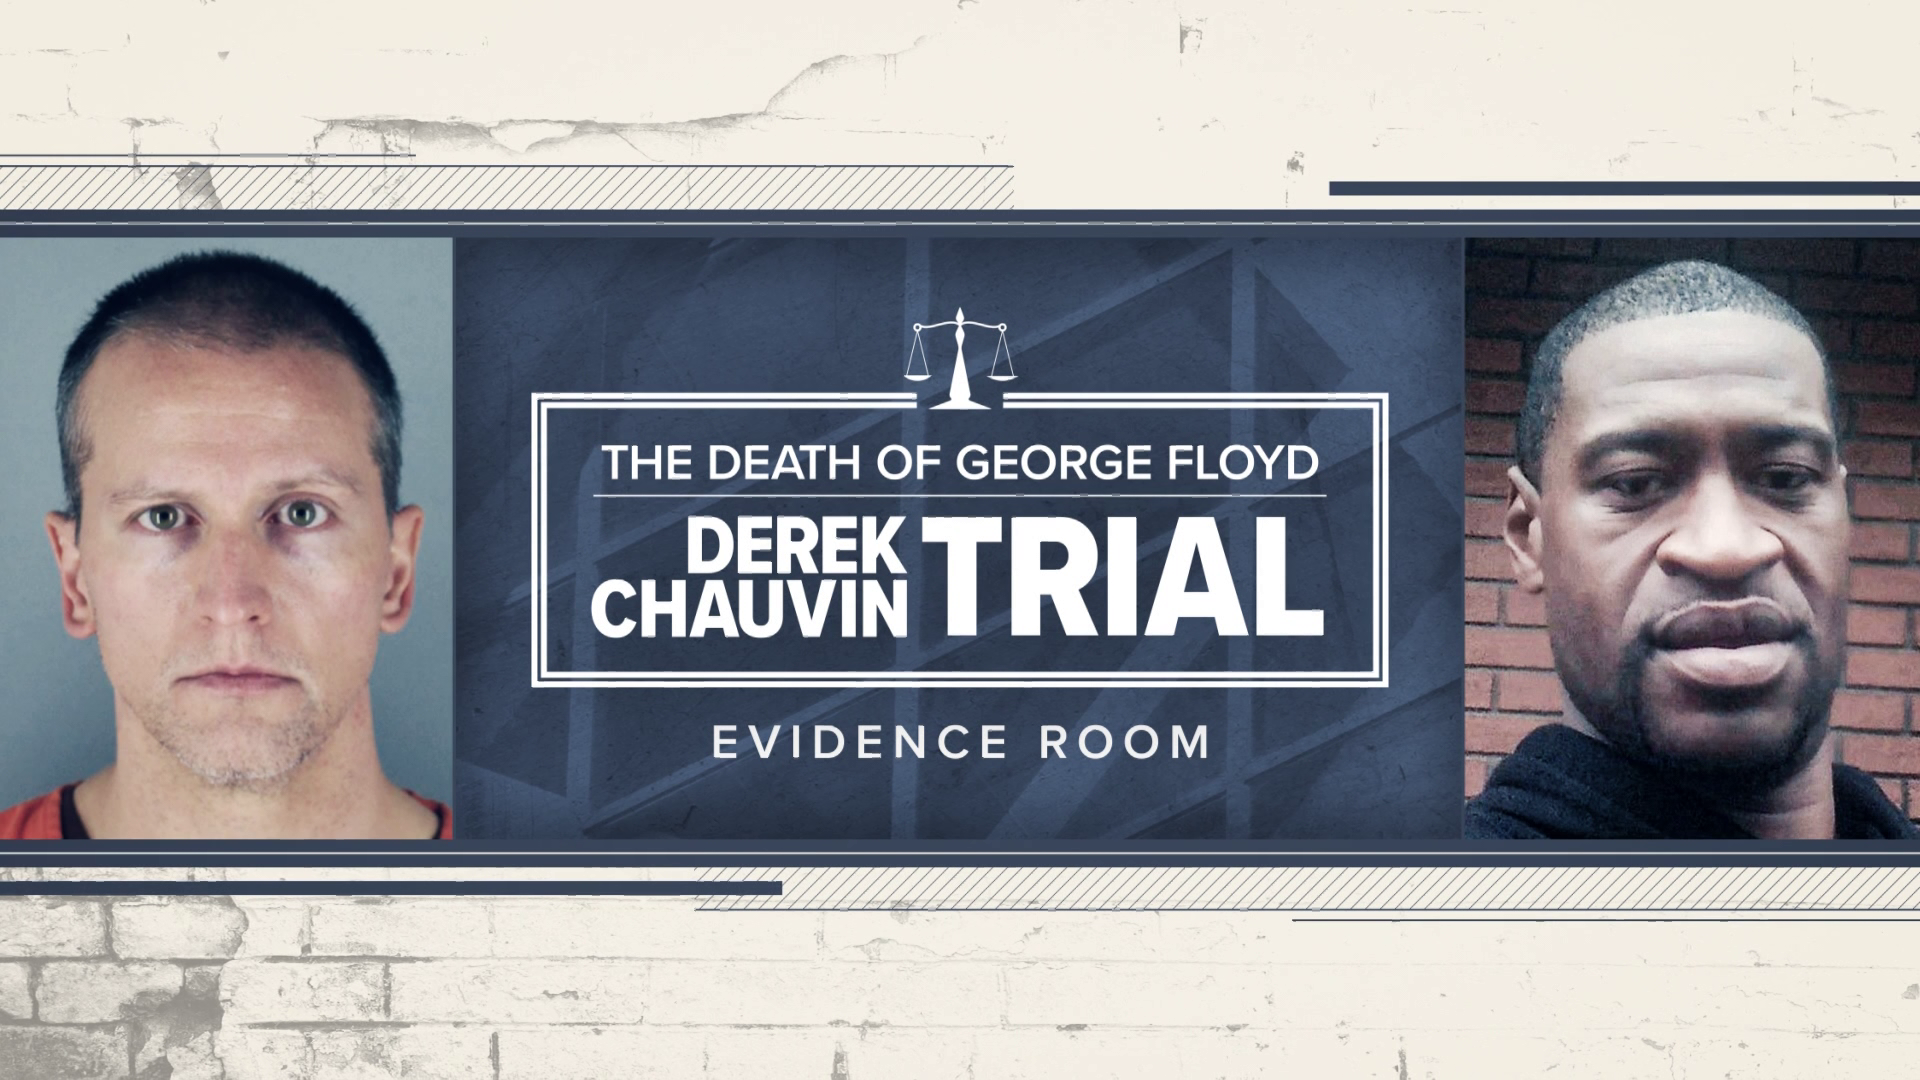 The toxicology report is a key exhibit in the Derek Chauvin trial. We take a closer look at the report and the amount of fentanyl found in George Floyd's system.